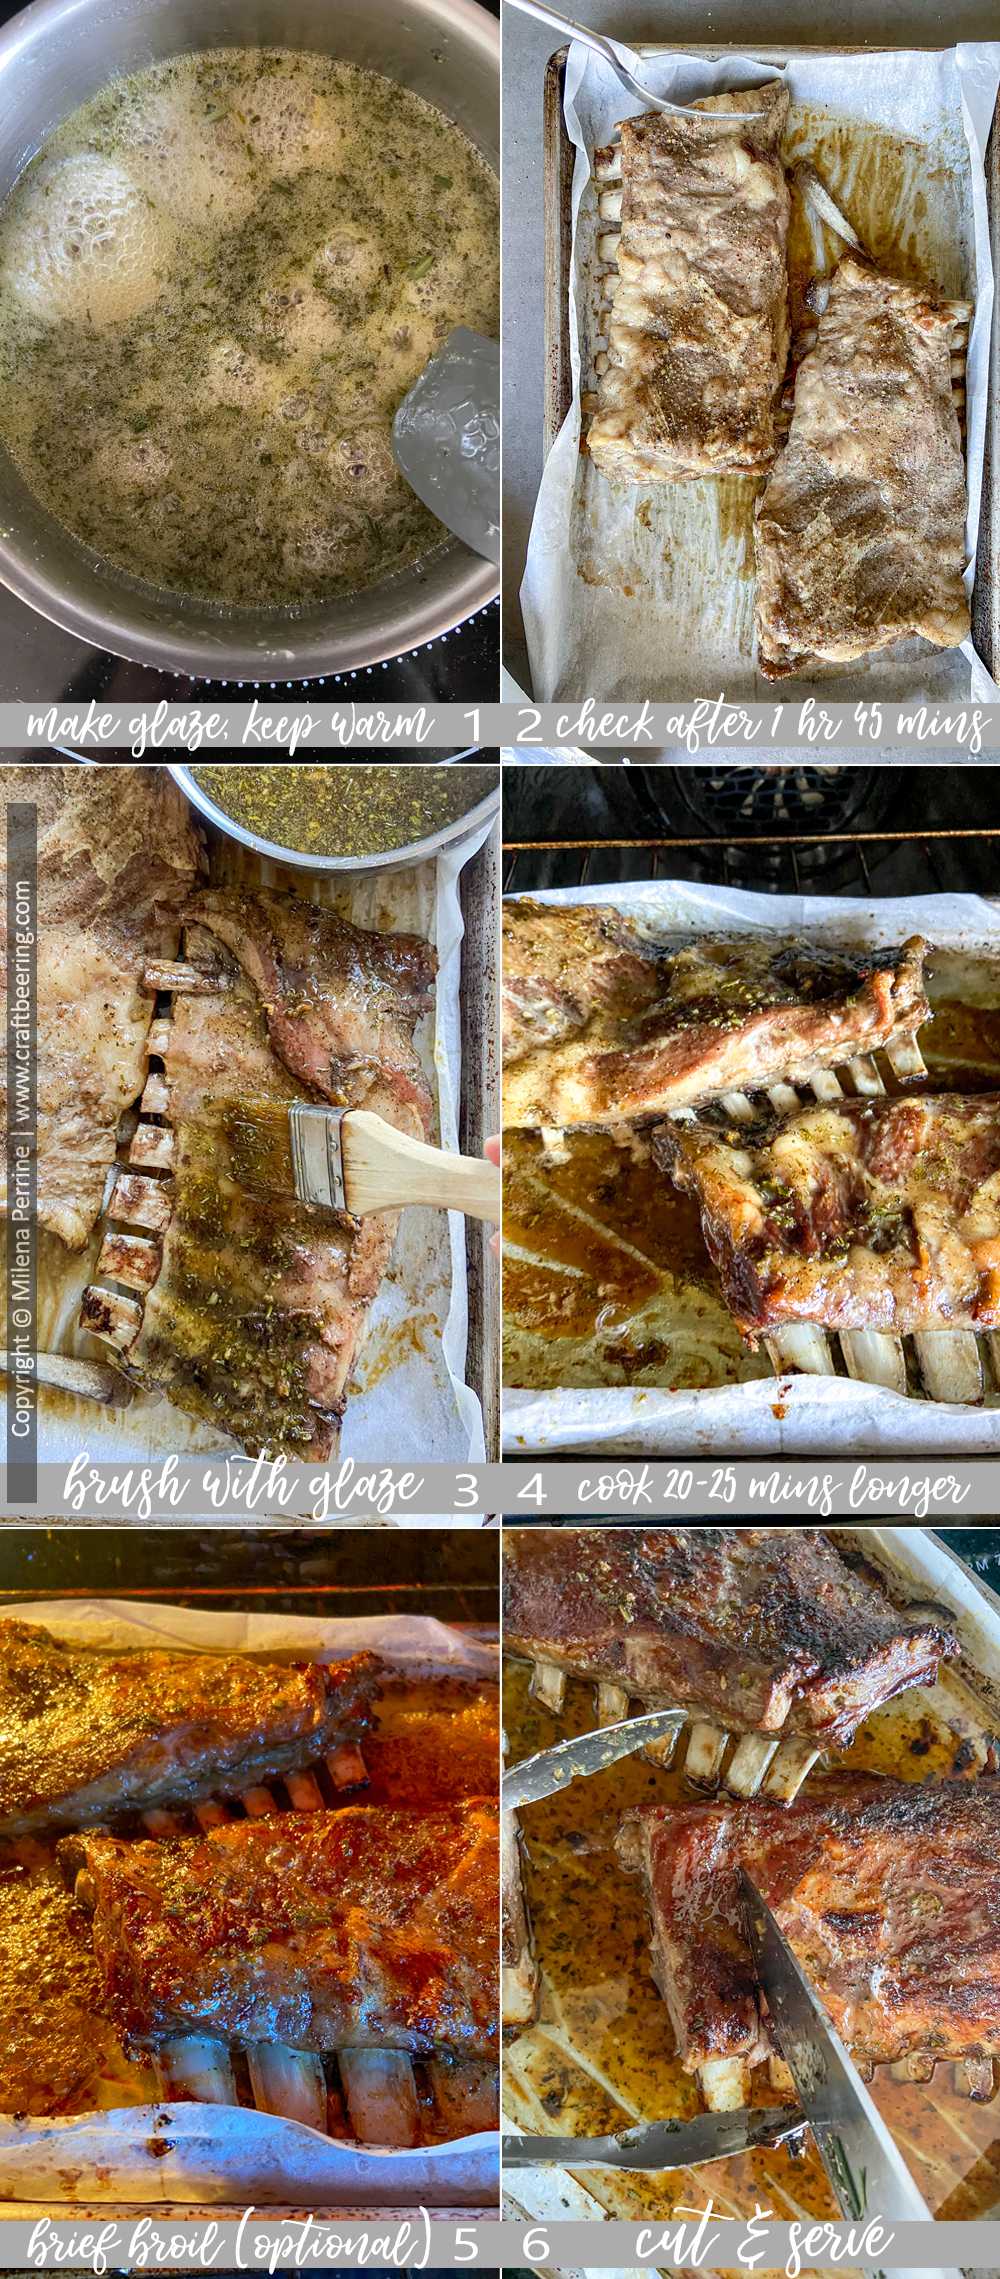 How to cook lamb ribs on the oven - workflow